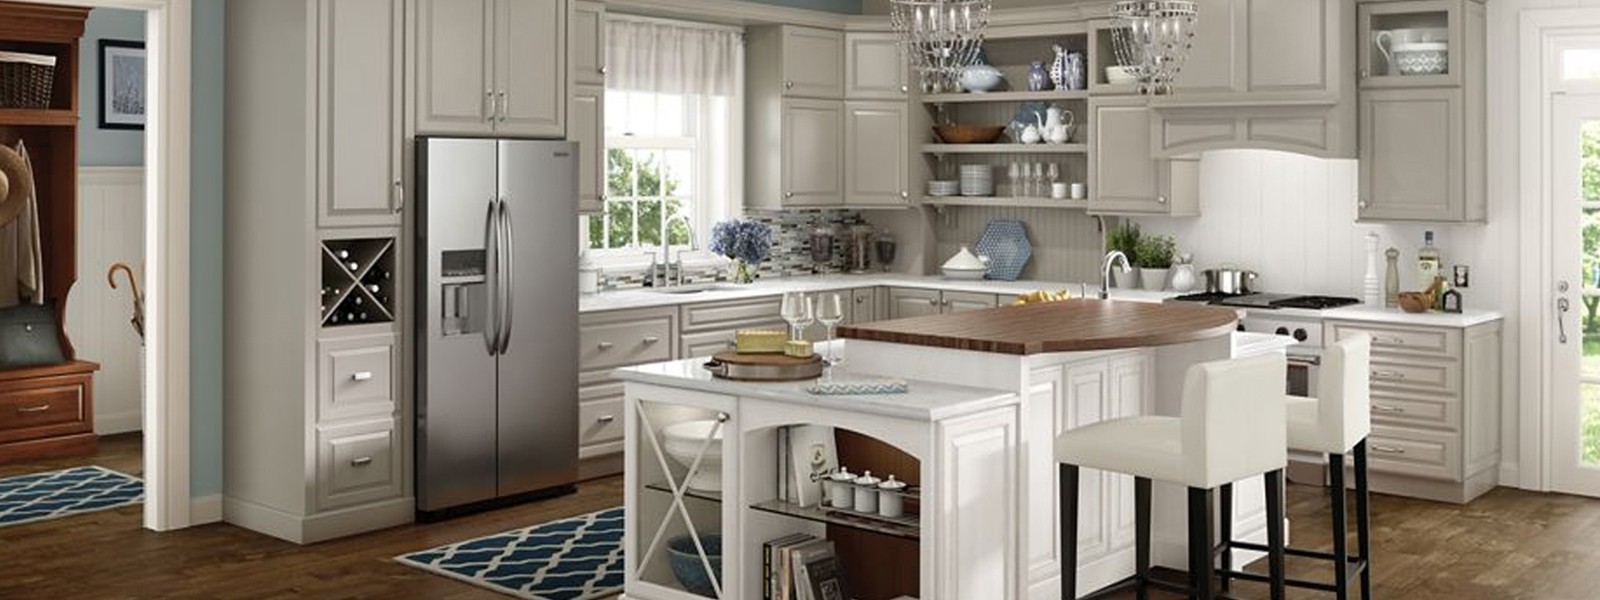 Union Tech, best kitchen remodeling company Kissimmee FL